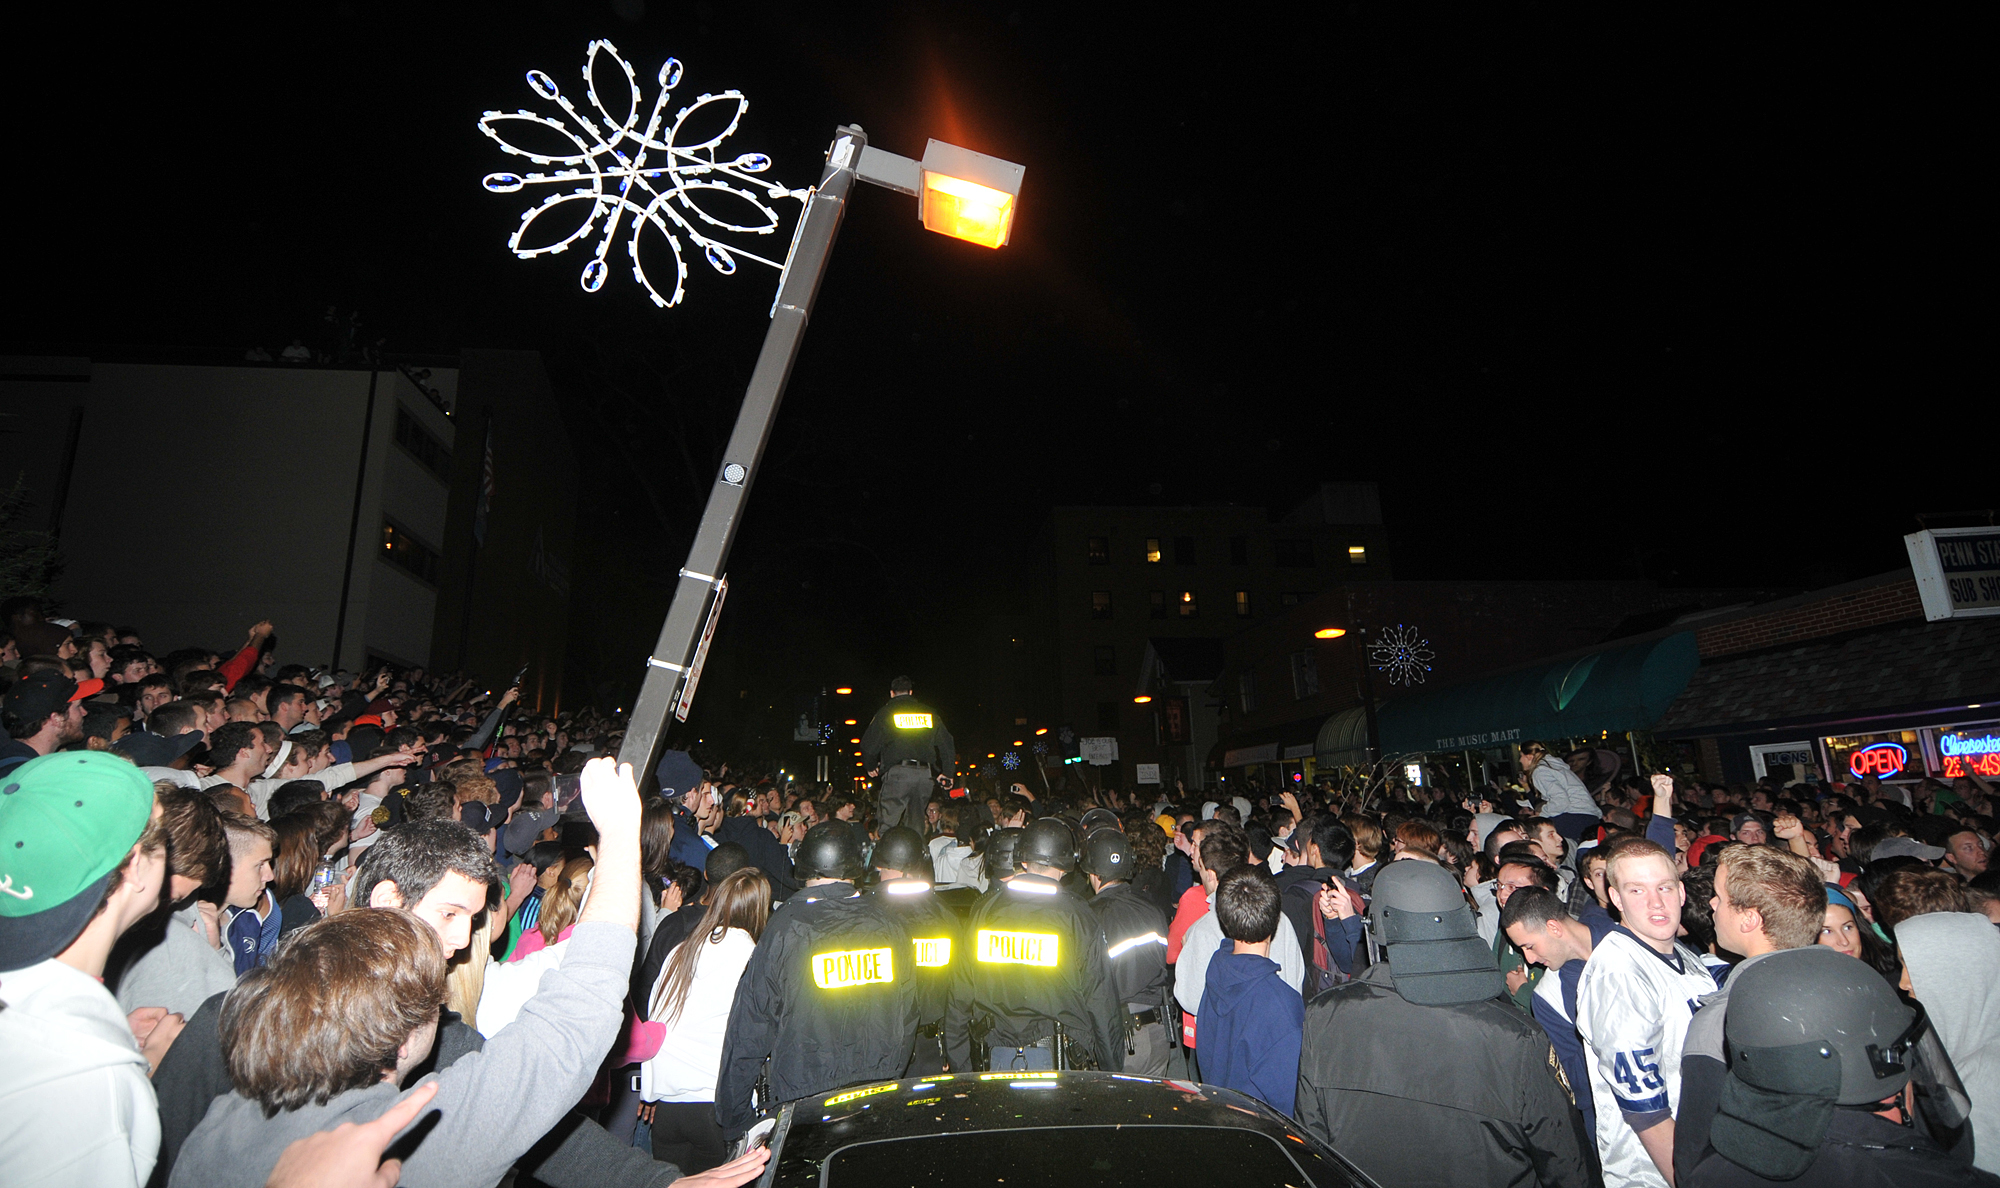  A policeman (center) walks on top of a car to use pepper spray on a rioter on Beaver Avenue during the riots on Wednesday night. The lightpole was also being torn down by rioters. 